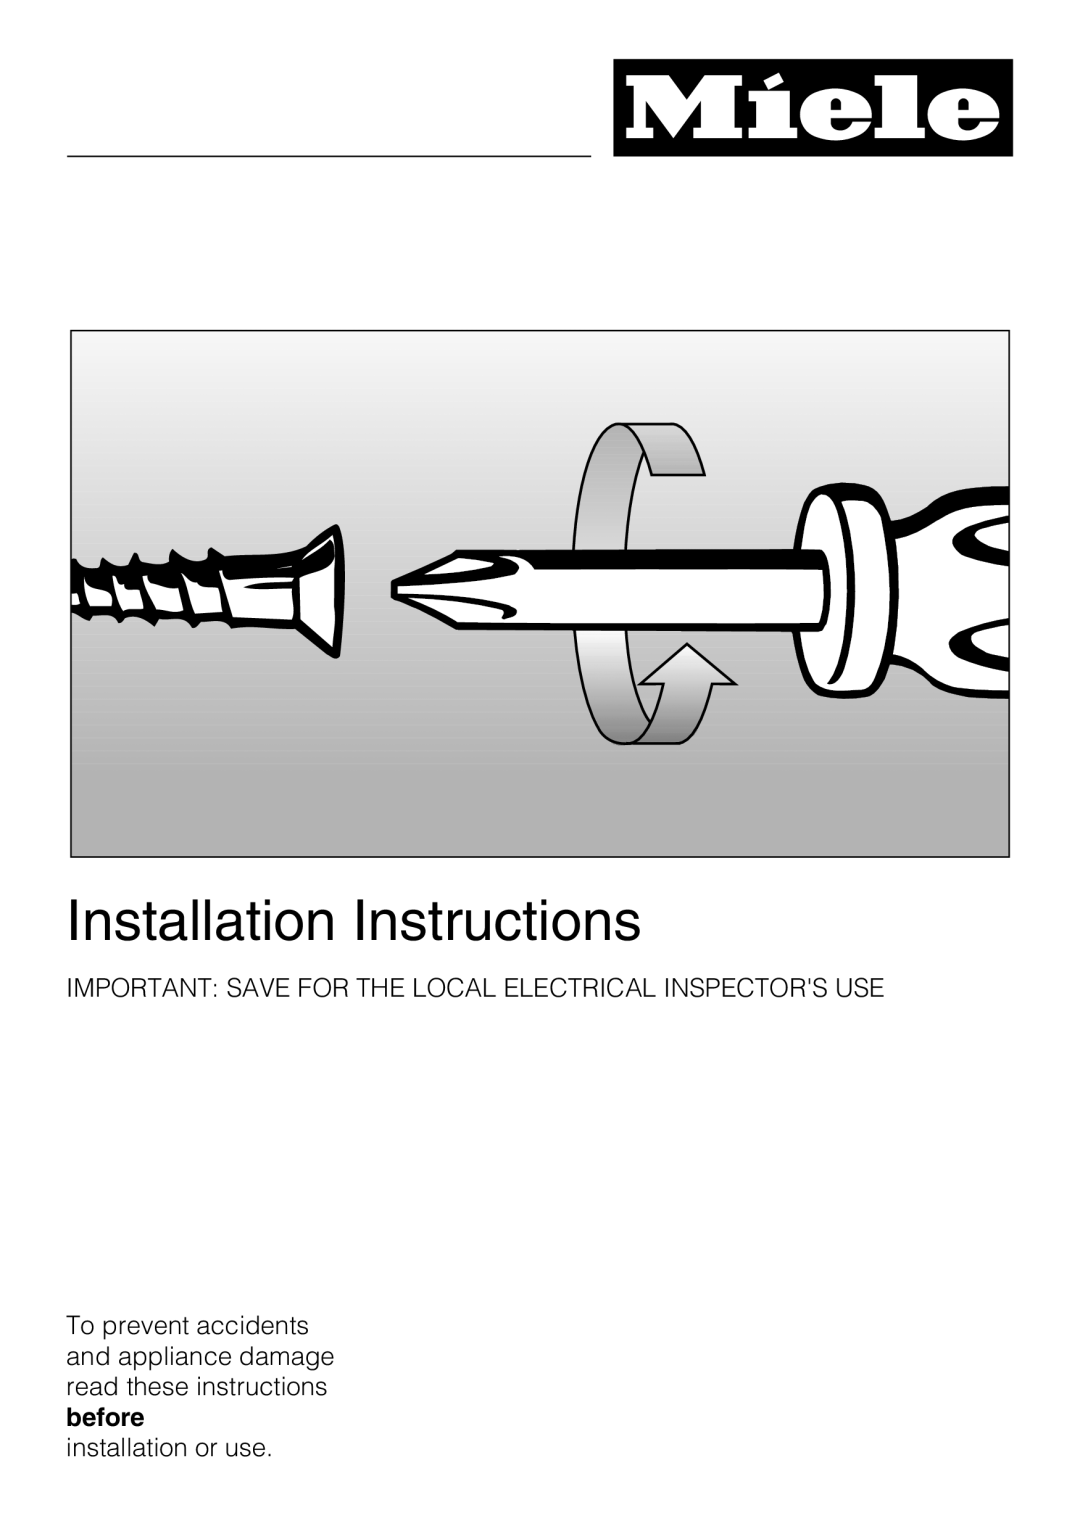 Miele CS 1028 Installation Instructions, Important Save For The Local Electrical Inspectors Use, installation or use 